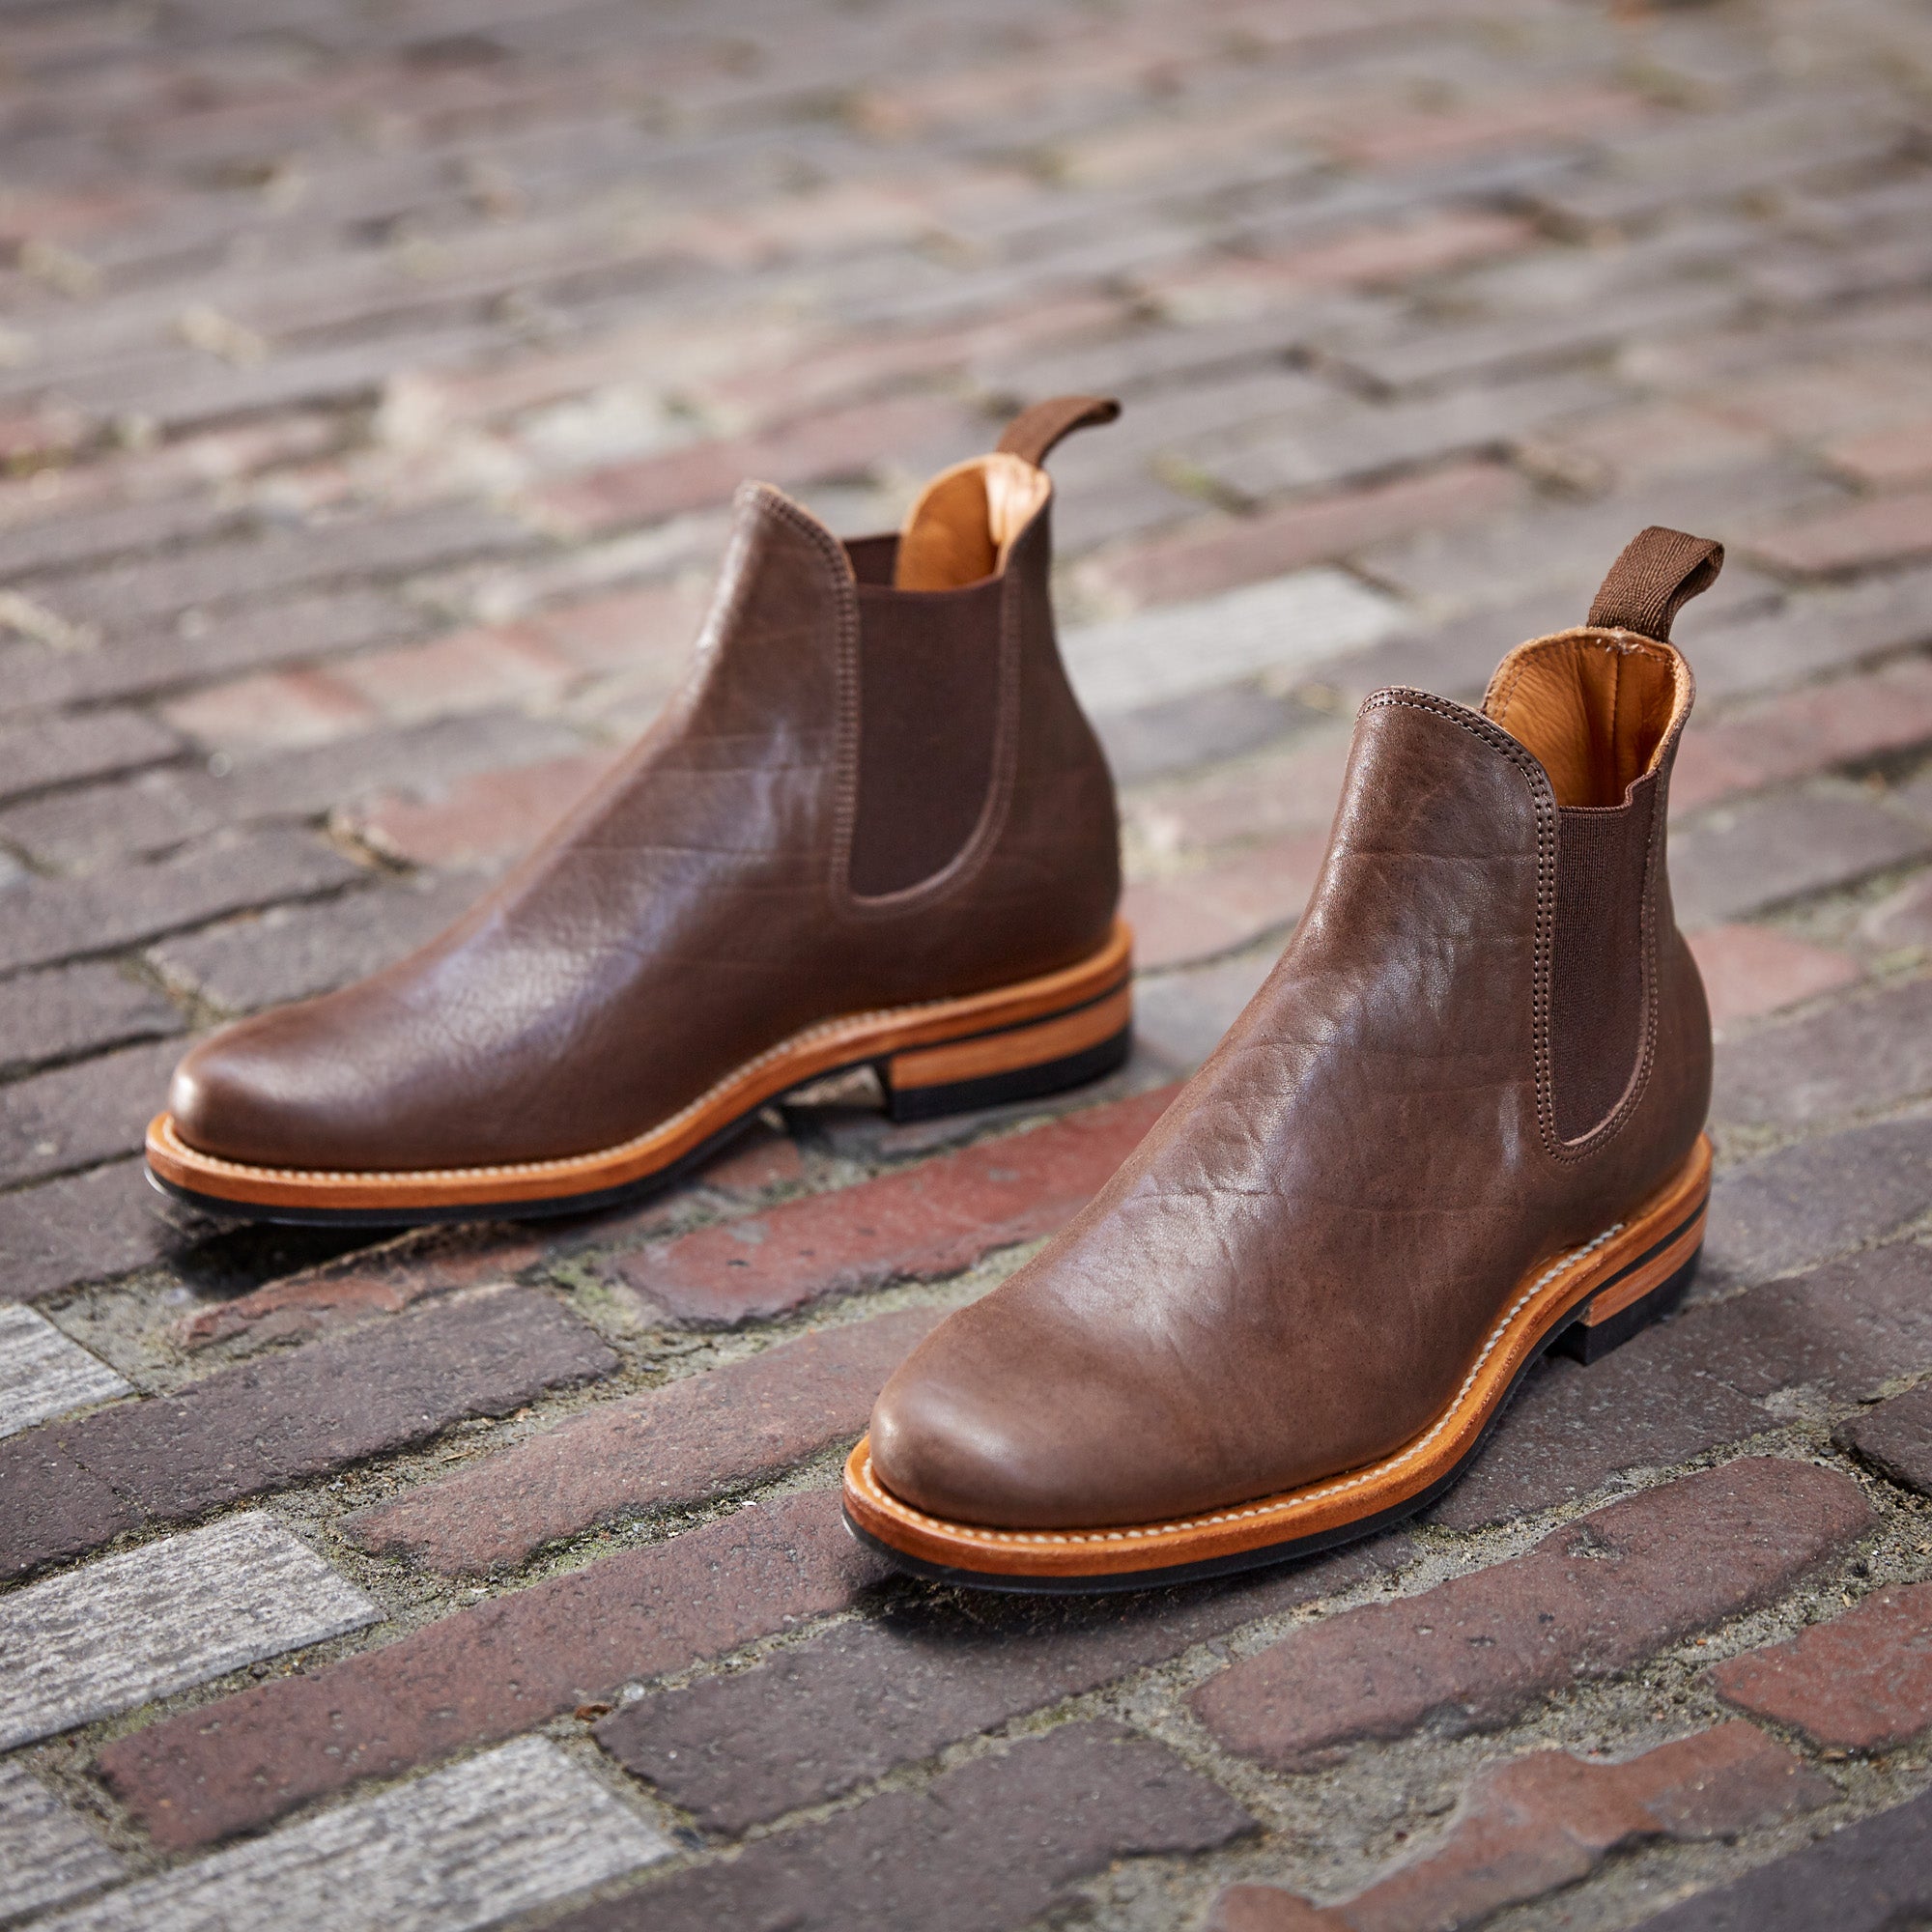 Division Road Dark Brown Washed Horsehide Chelsea Boot